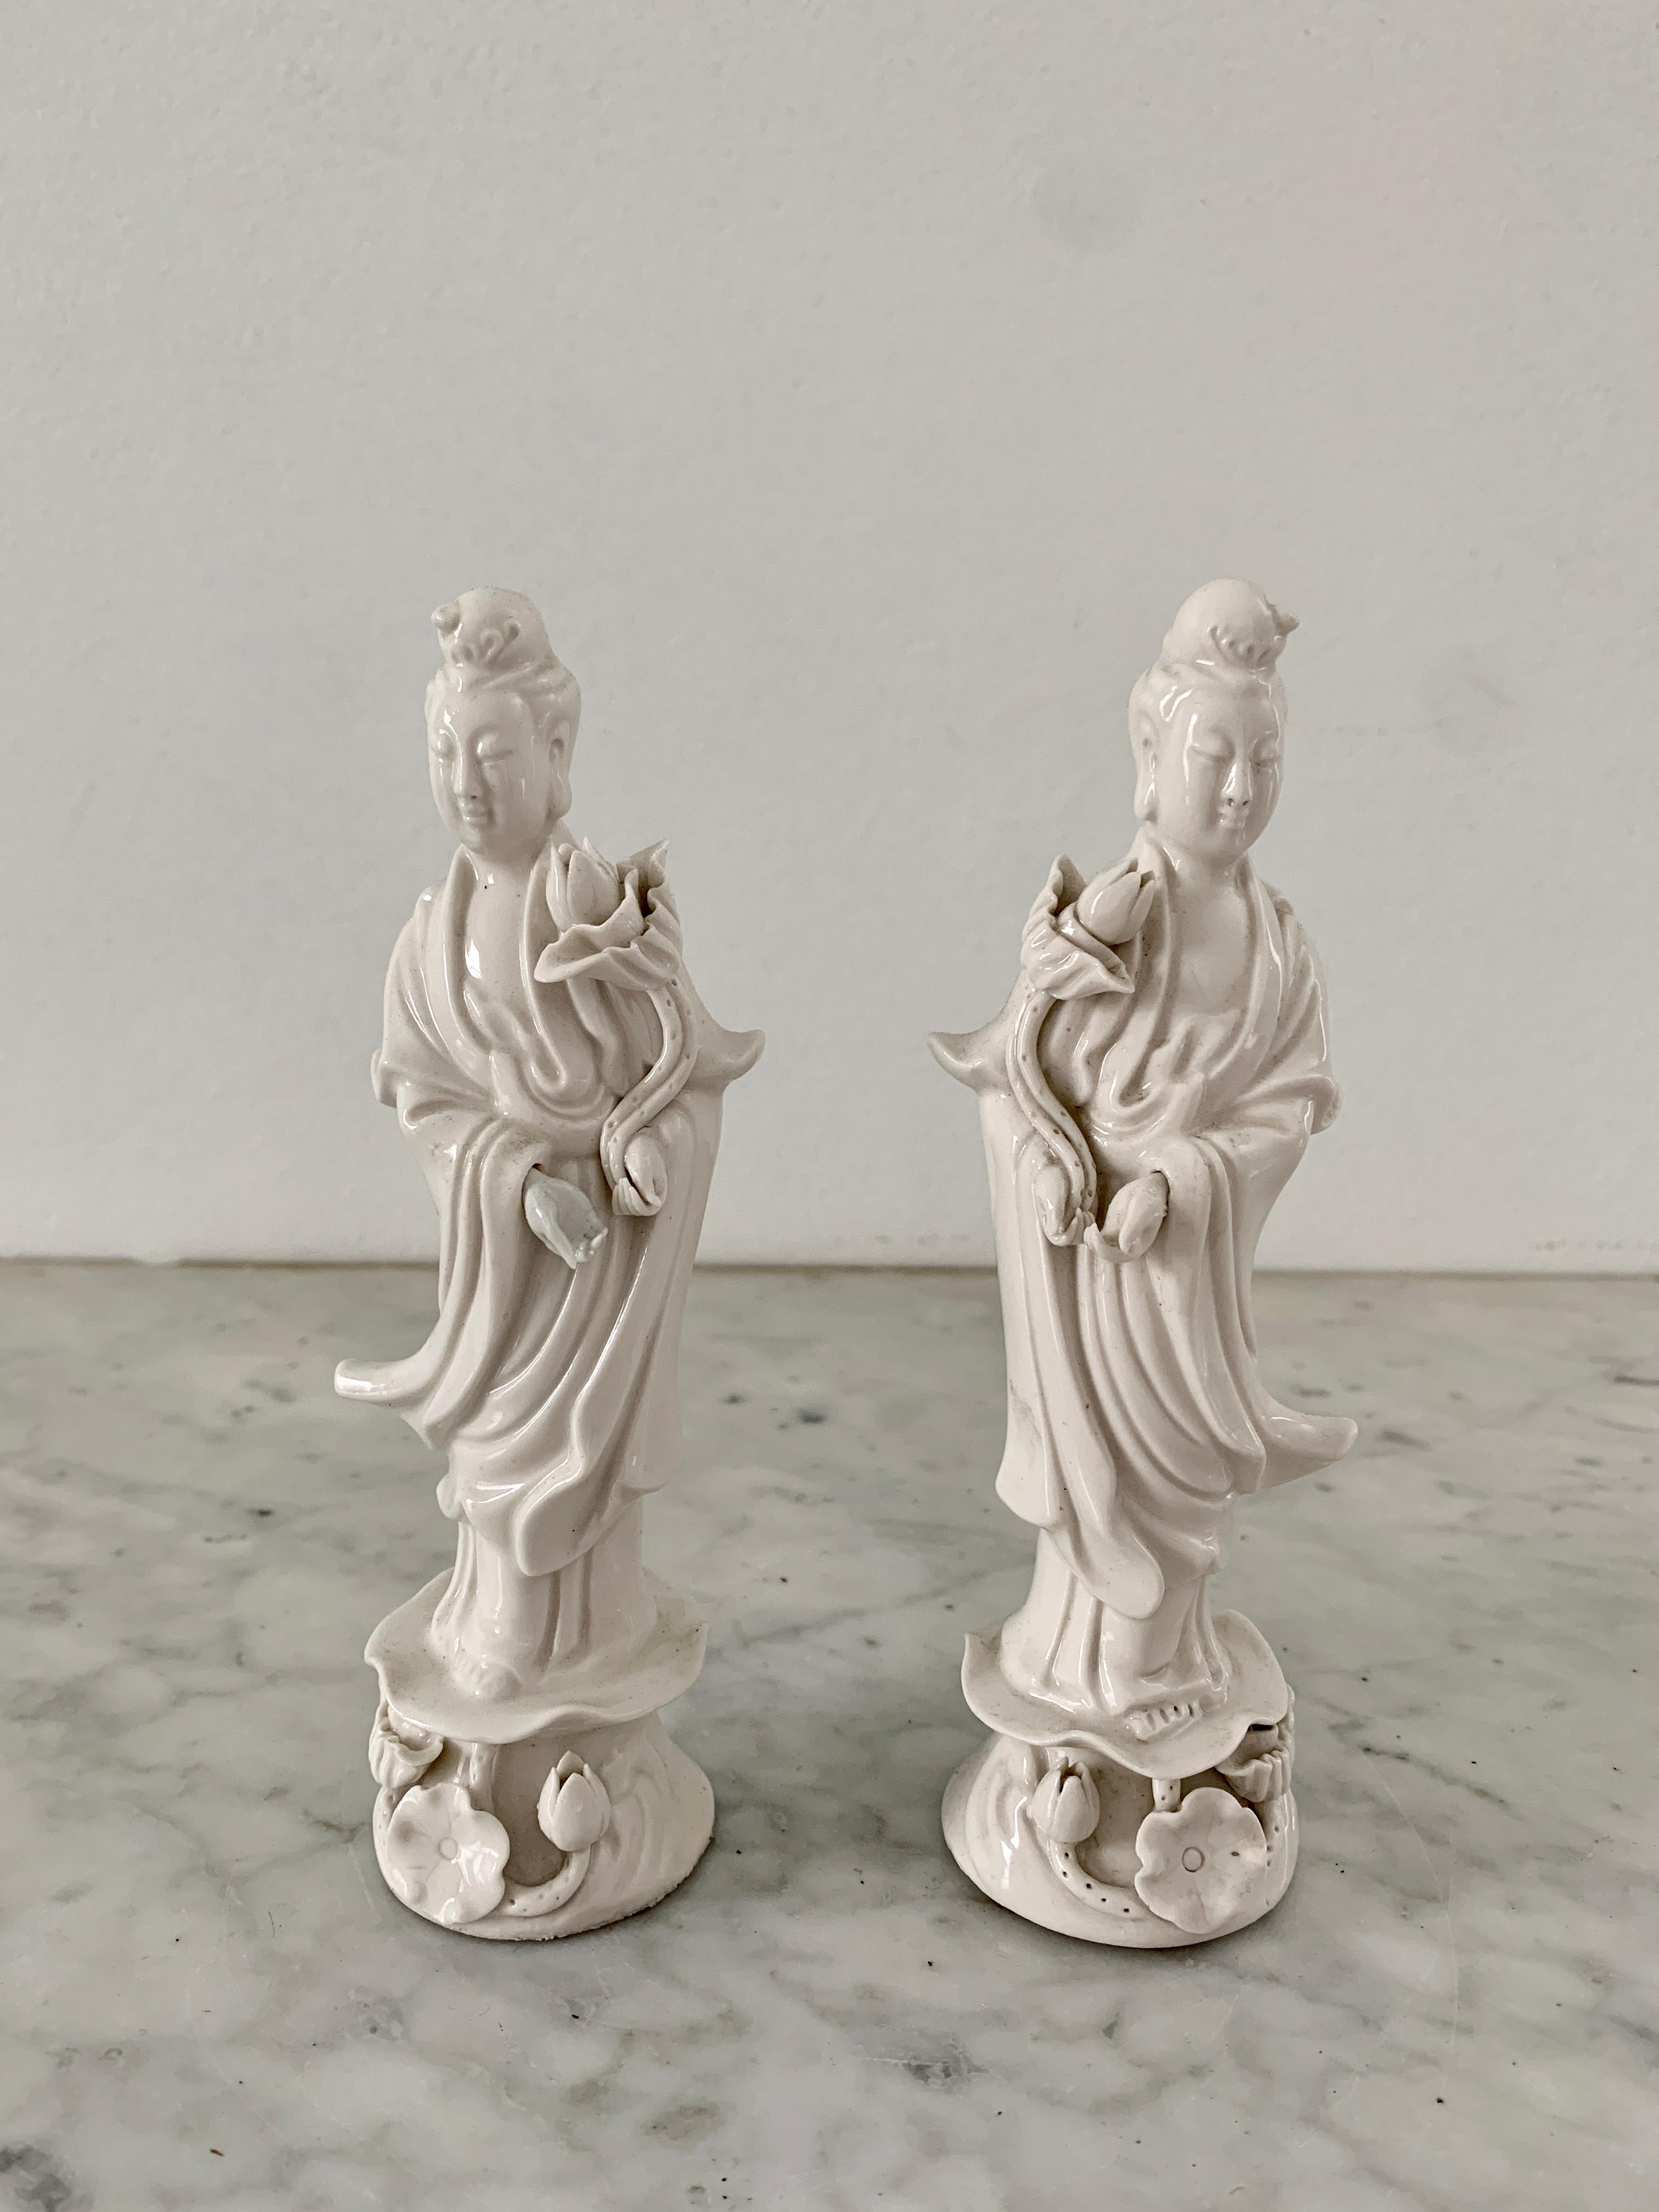 20th Century Collection of Chinoiserie Blanc De Chine White Porcelain Figures, a Set of 7